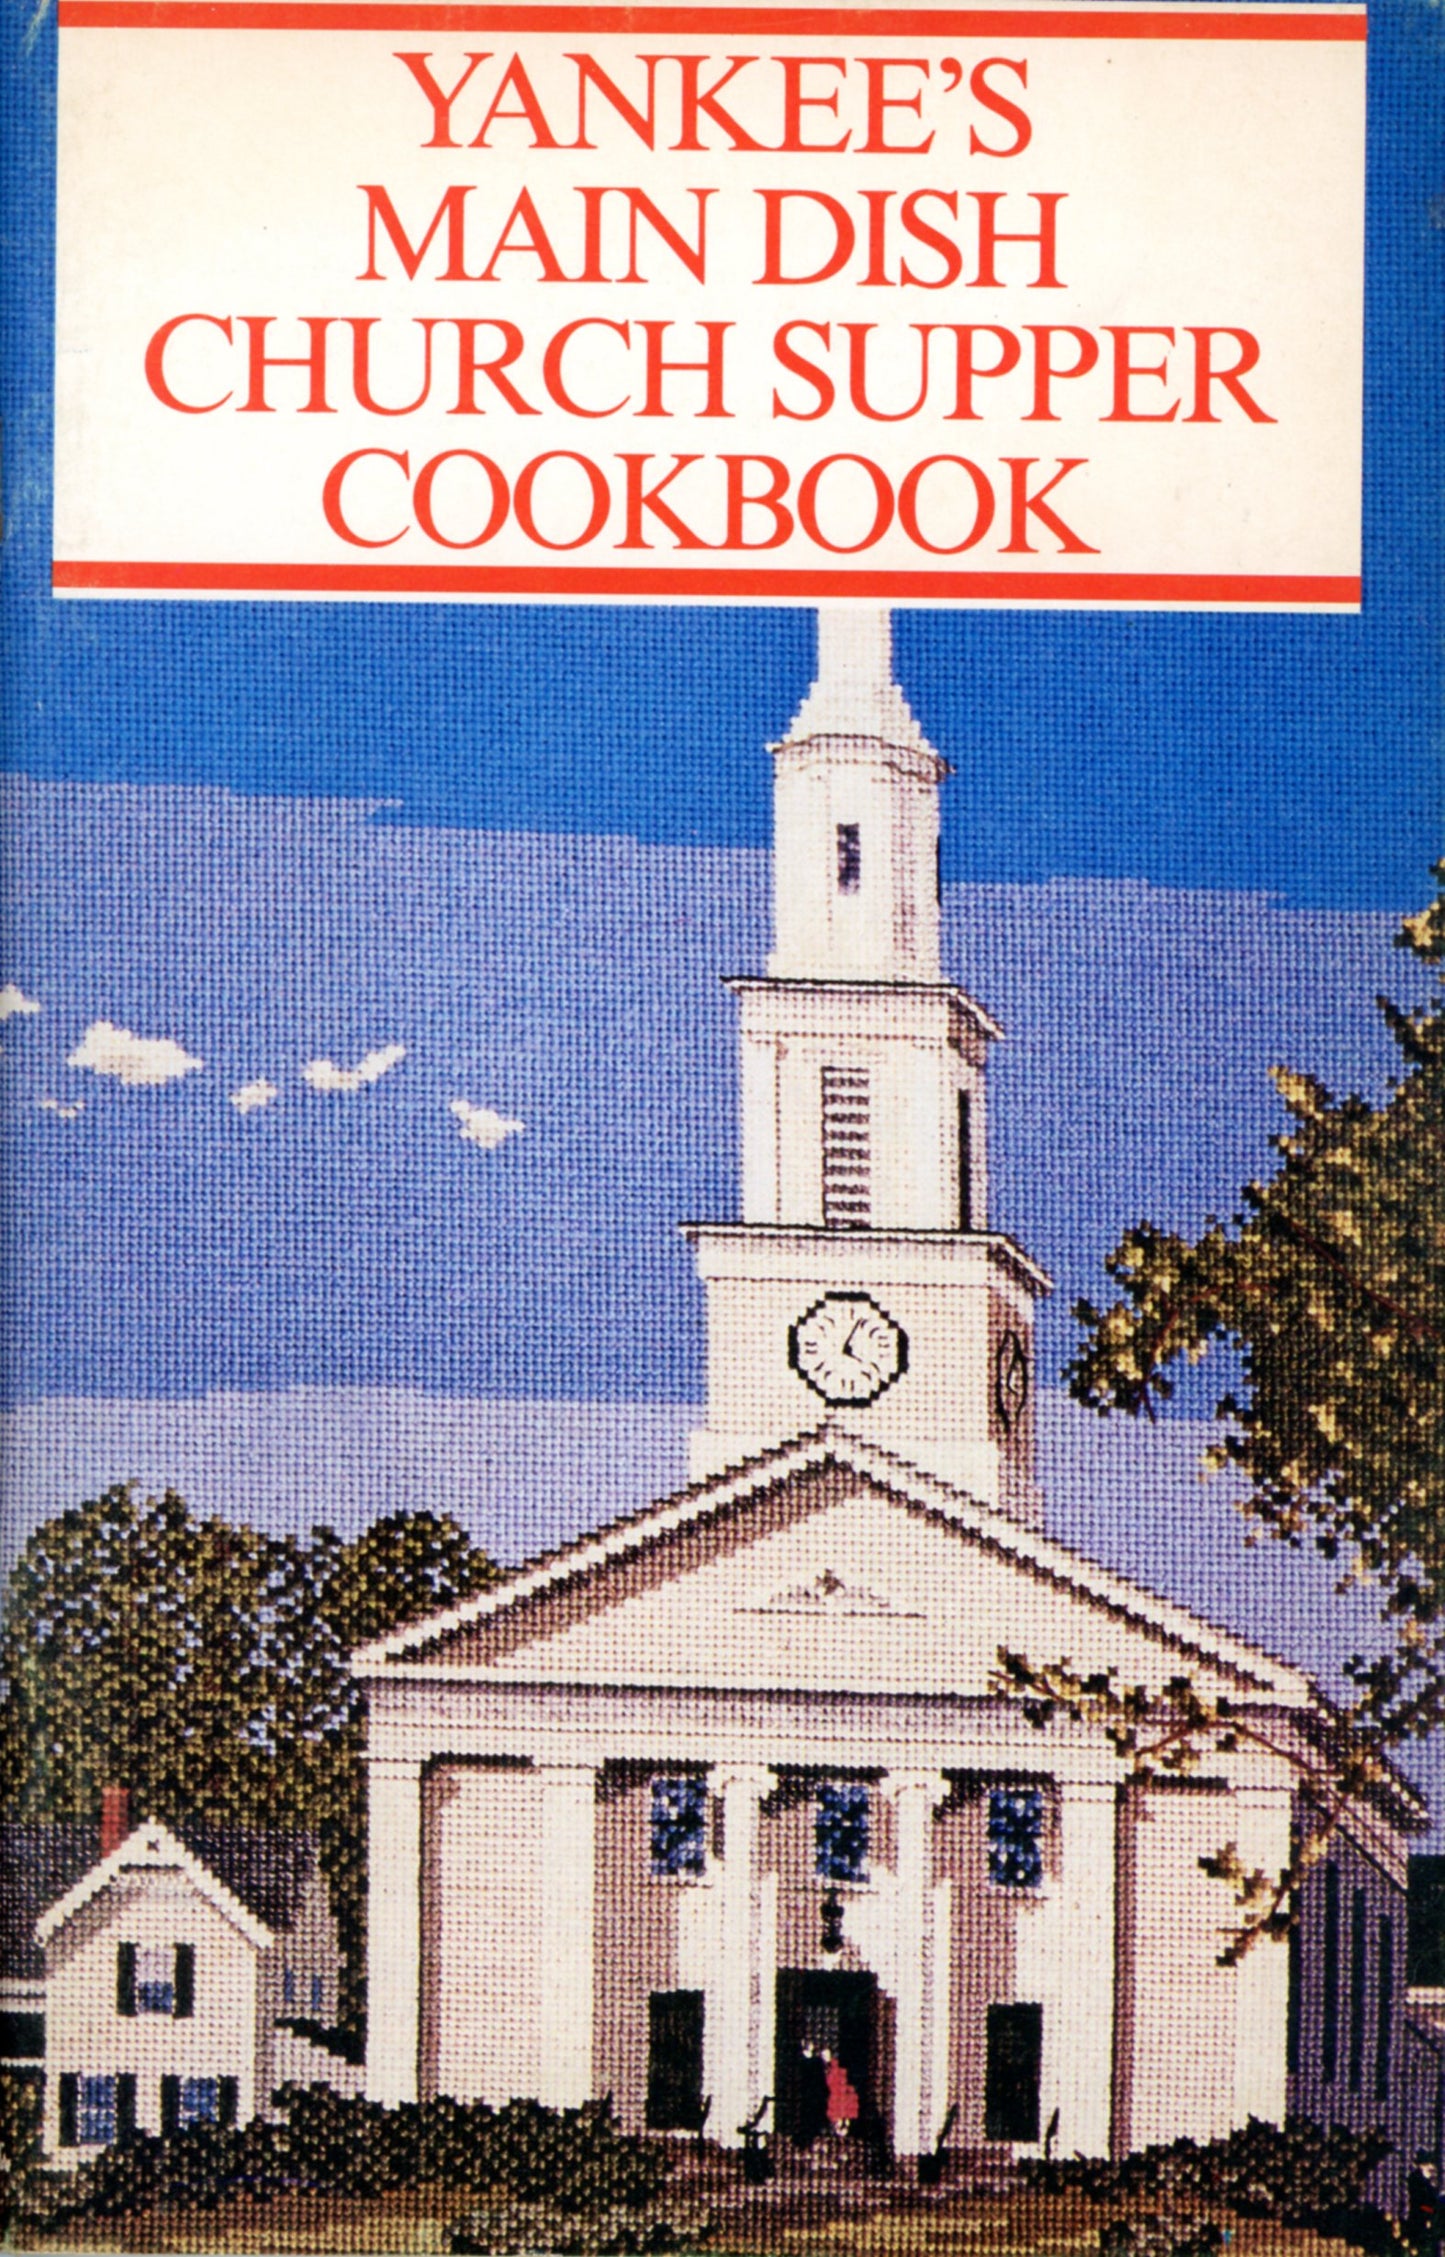 YANKEE'S MAIN DISH CHURCH SUPPER COOKBOOK Vintage Recipe Booklet Produced by Yankee Books ©1980